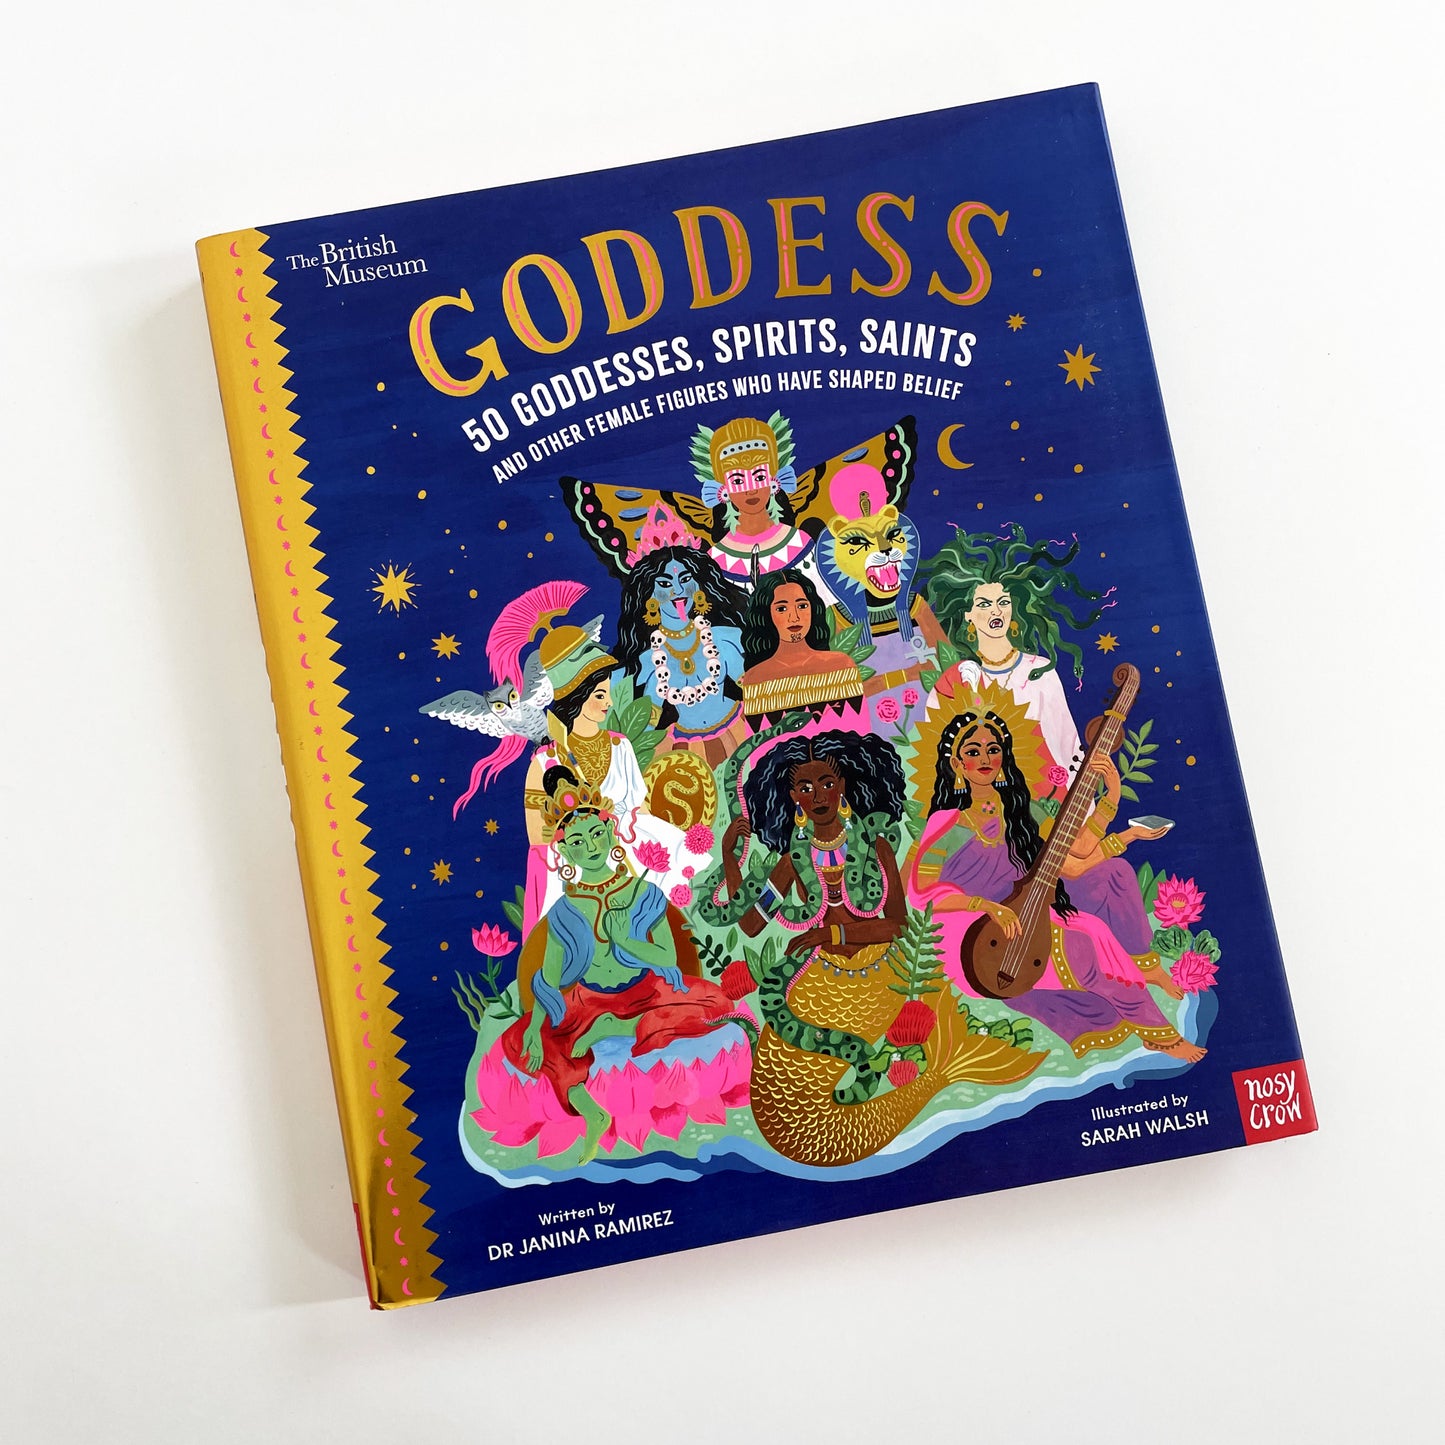 50 Goddesses, Spirits, Saints and Other Female Figures Who Have Shaped Belief